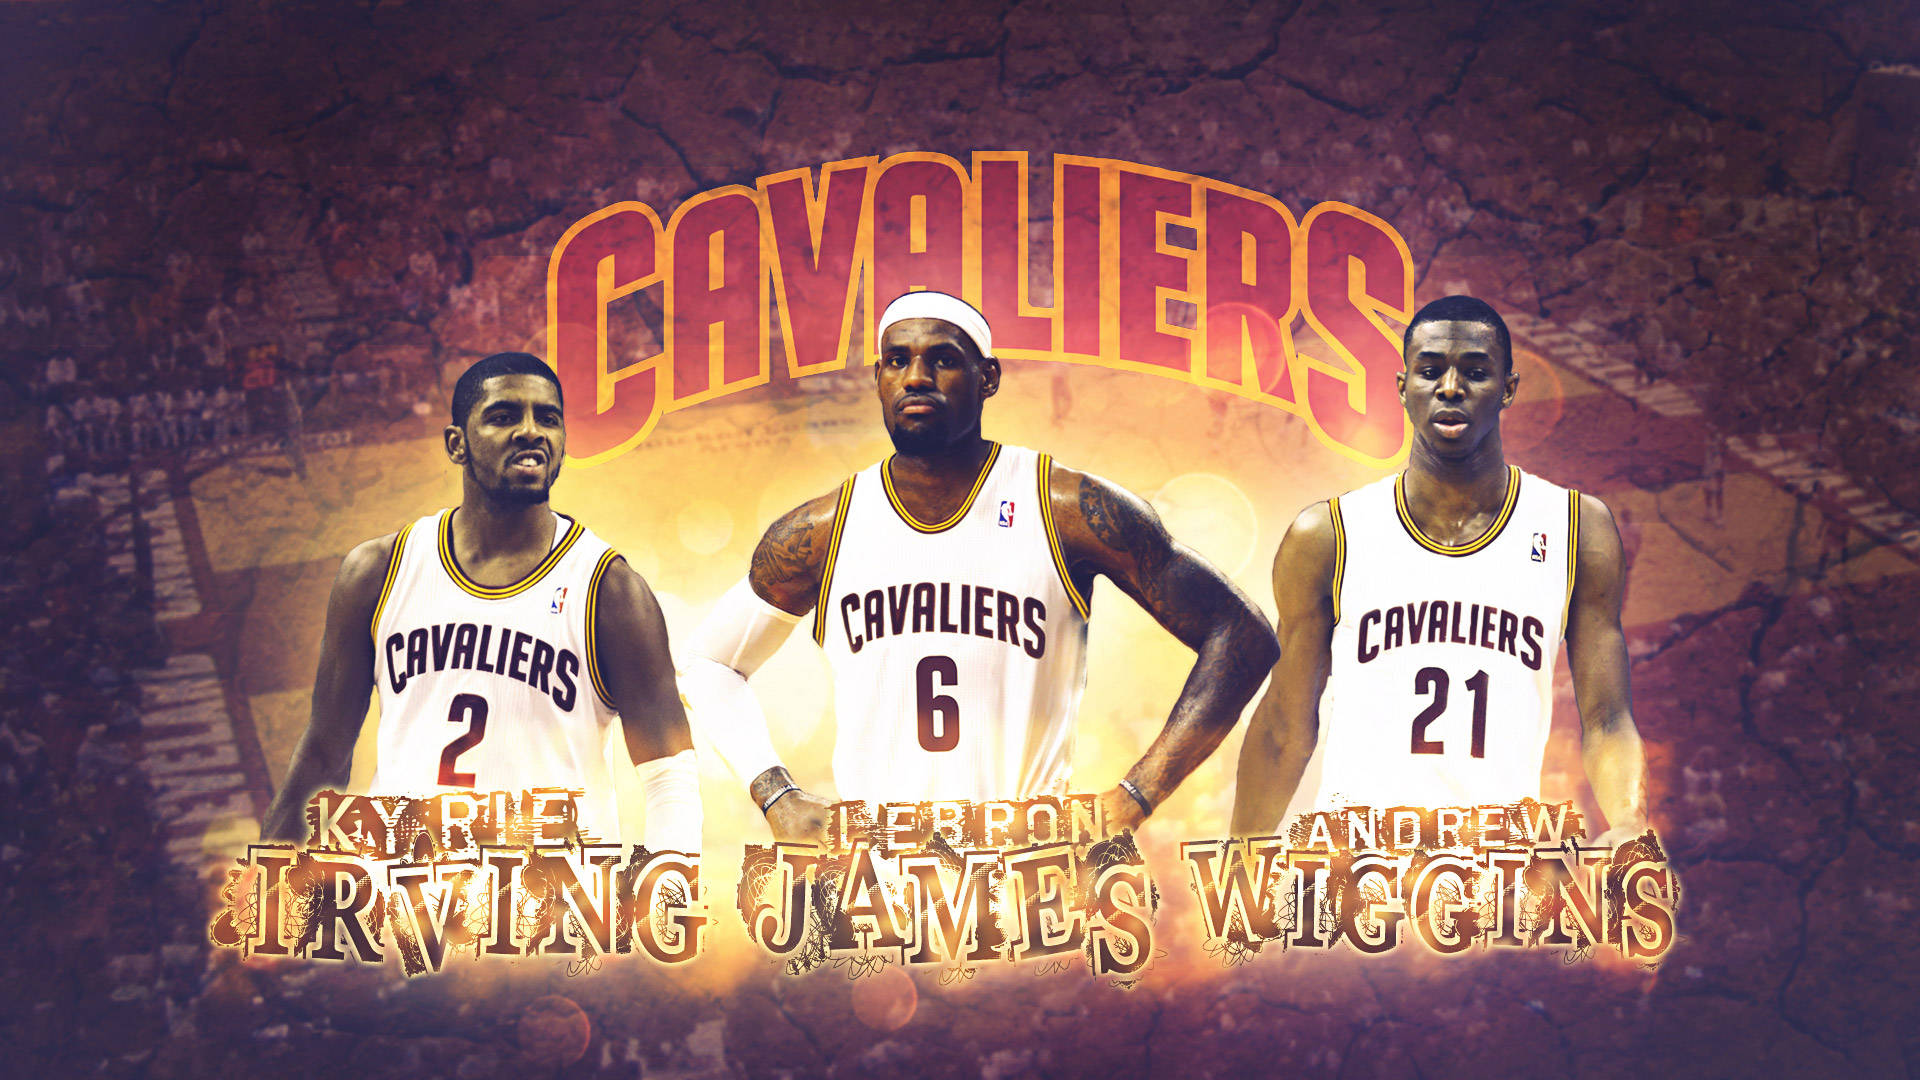 Cleveland Cavaliers Basketball Team Background